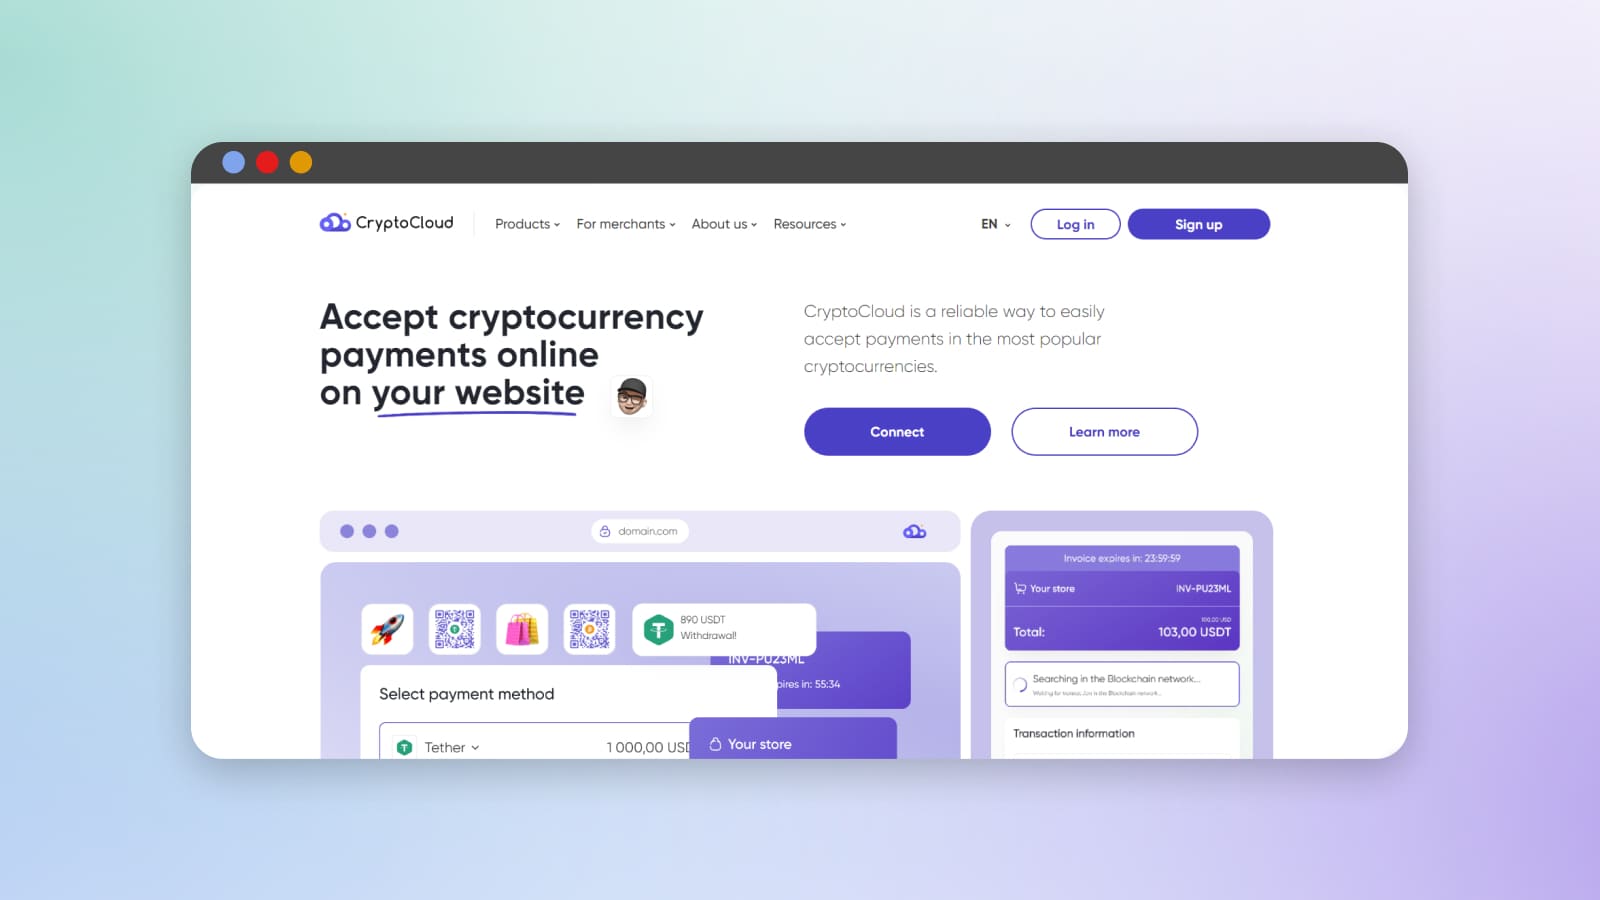 Accepting payments in cryptocurrency using CryptoCloud.